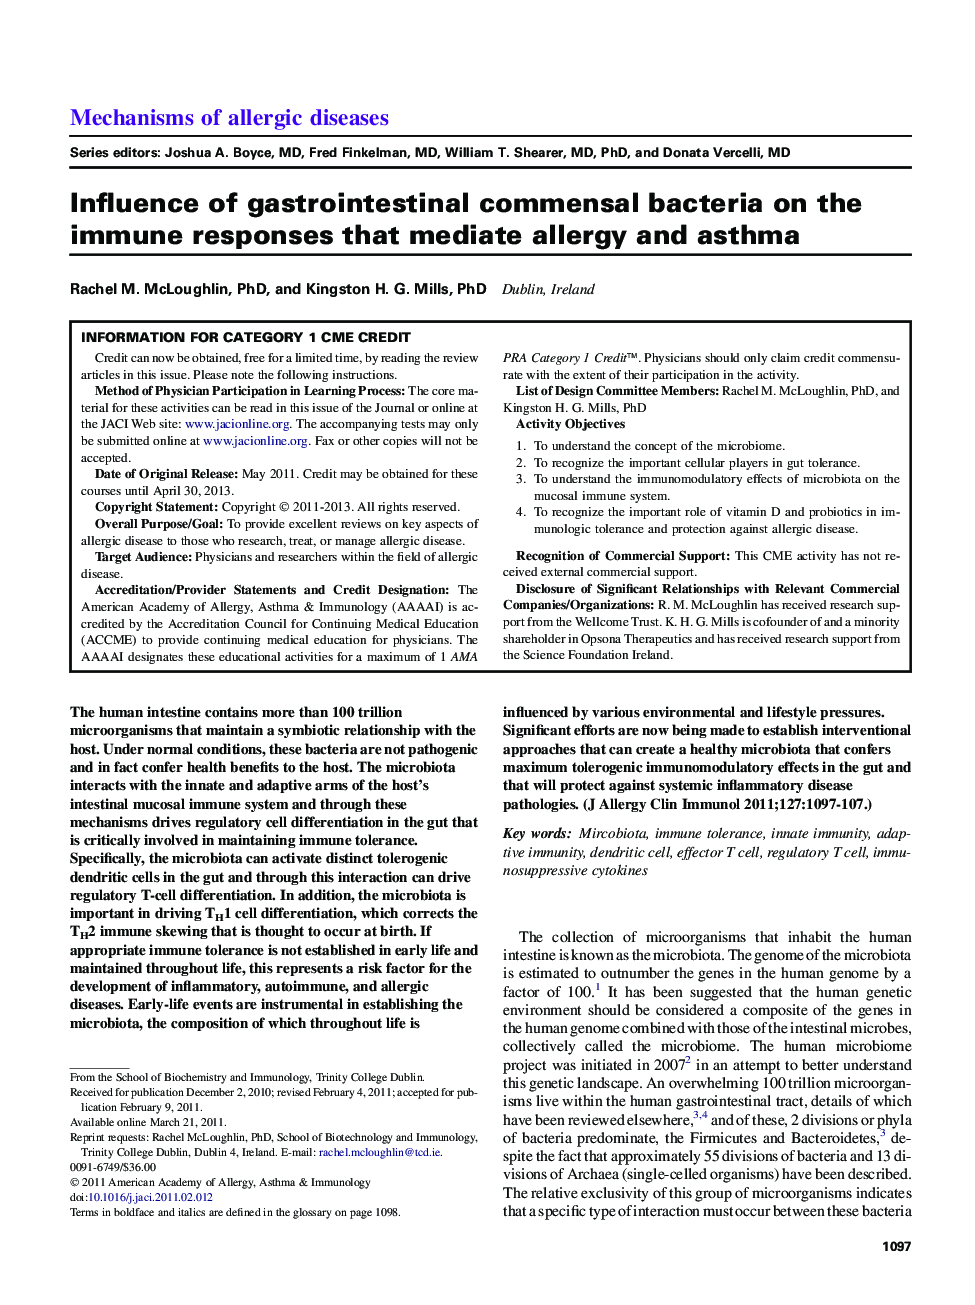 Influence of gastrointestinal commensal bacteria on the immune responses that mediate allergy and asthma 